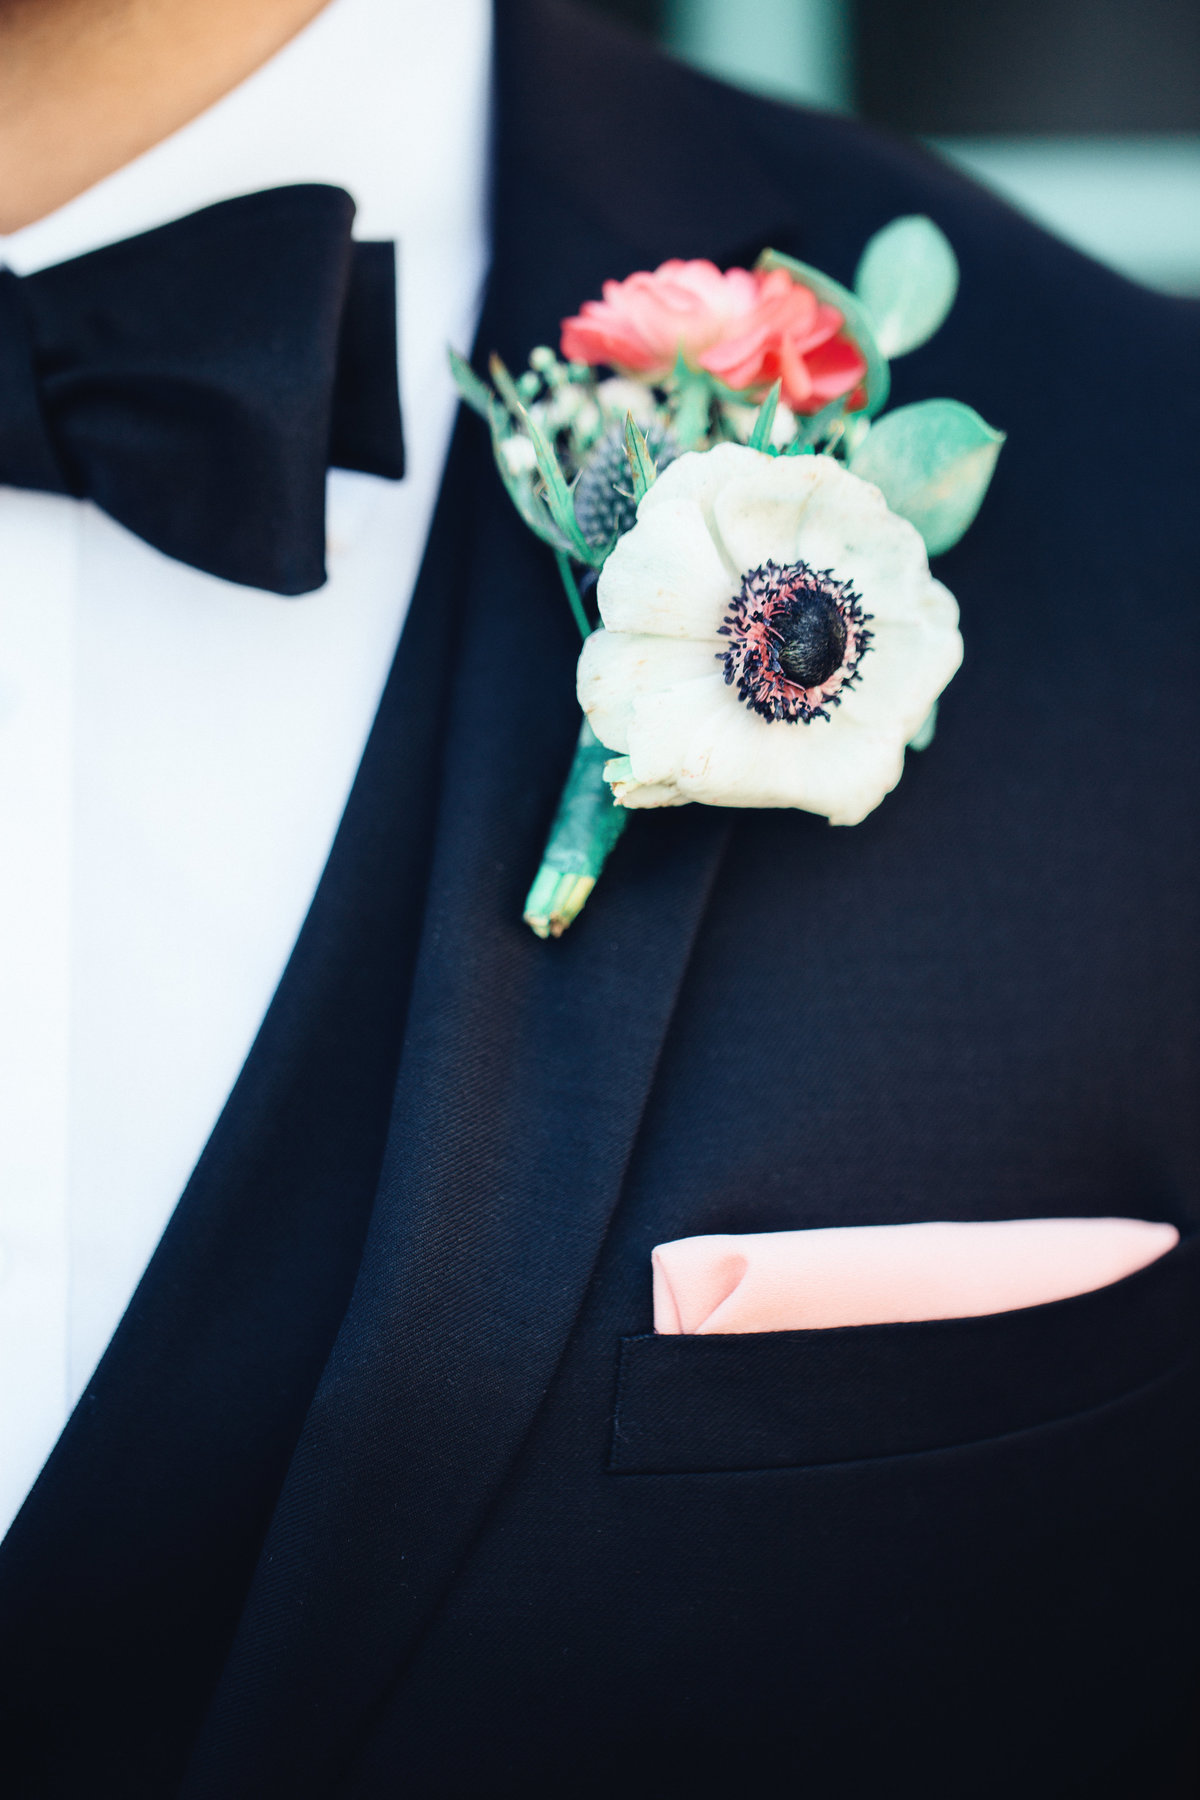 Wedding Photograph Of Corsage Pinned to The Black Suit of Groom Los Angeles